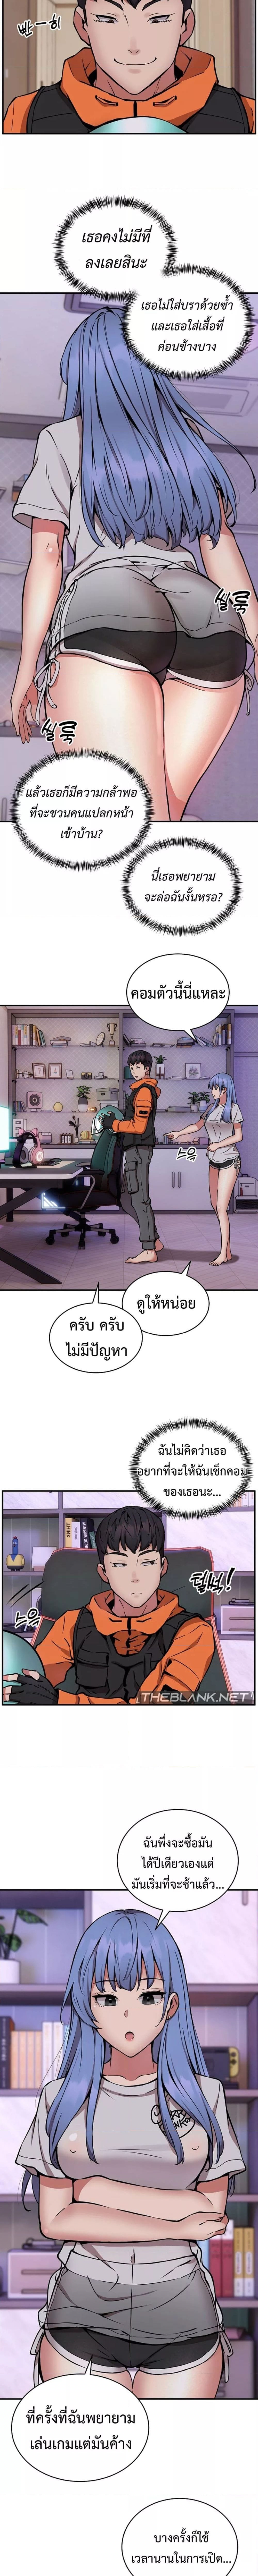 Driver in the New City ตอนที่ 12 ภาพ 2